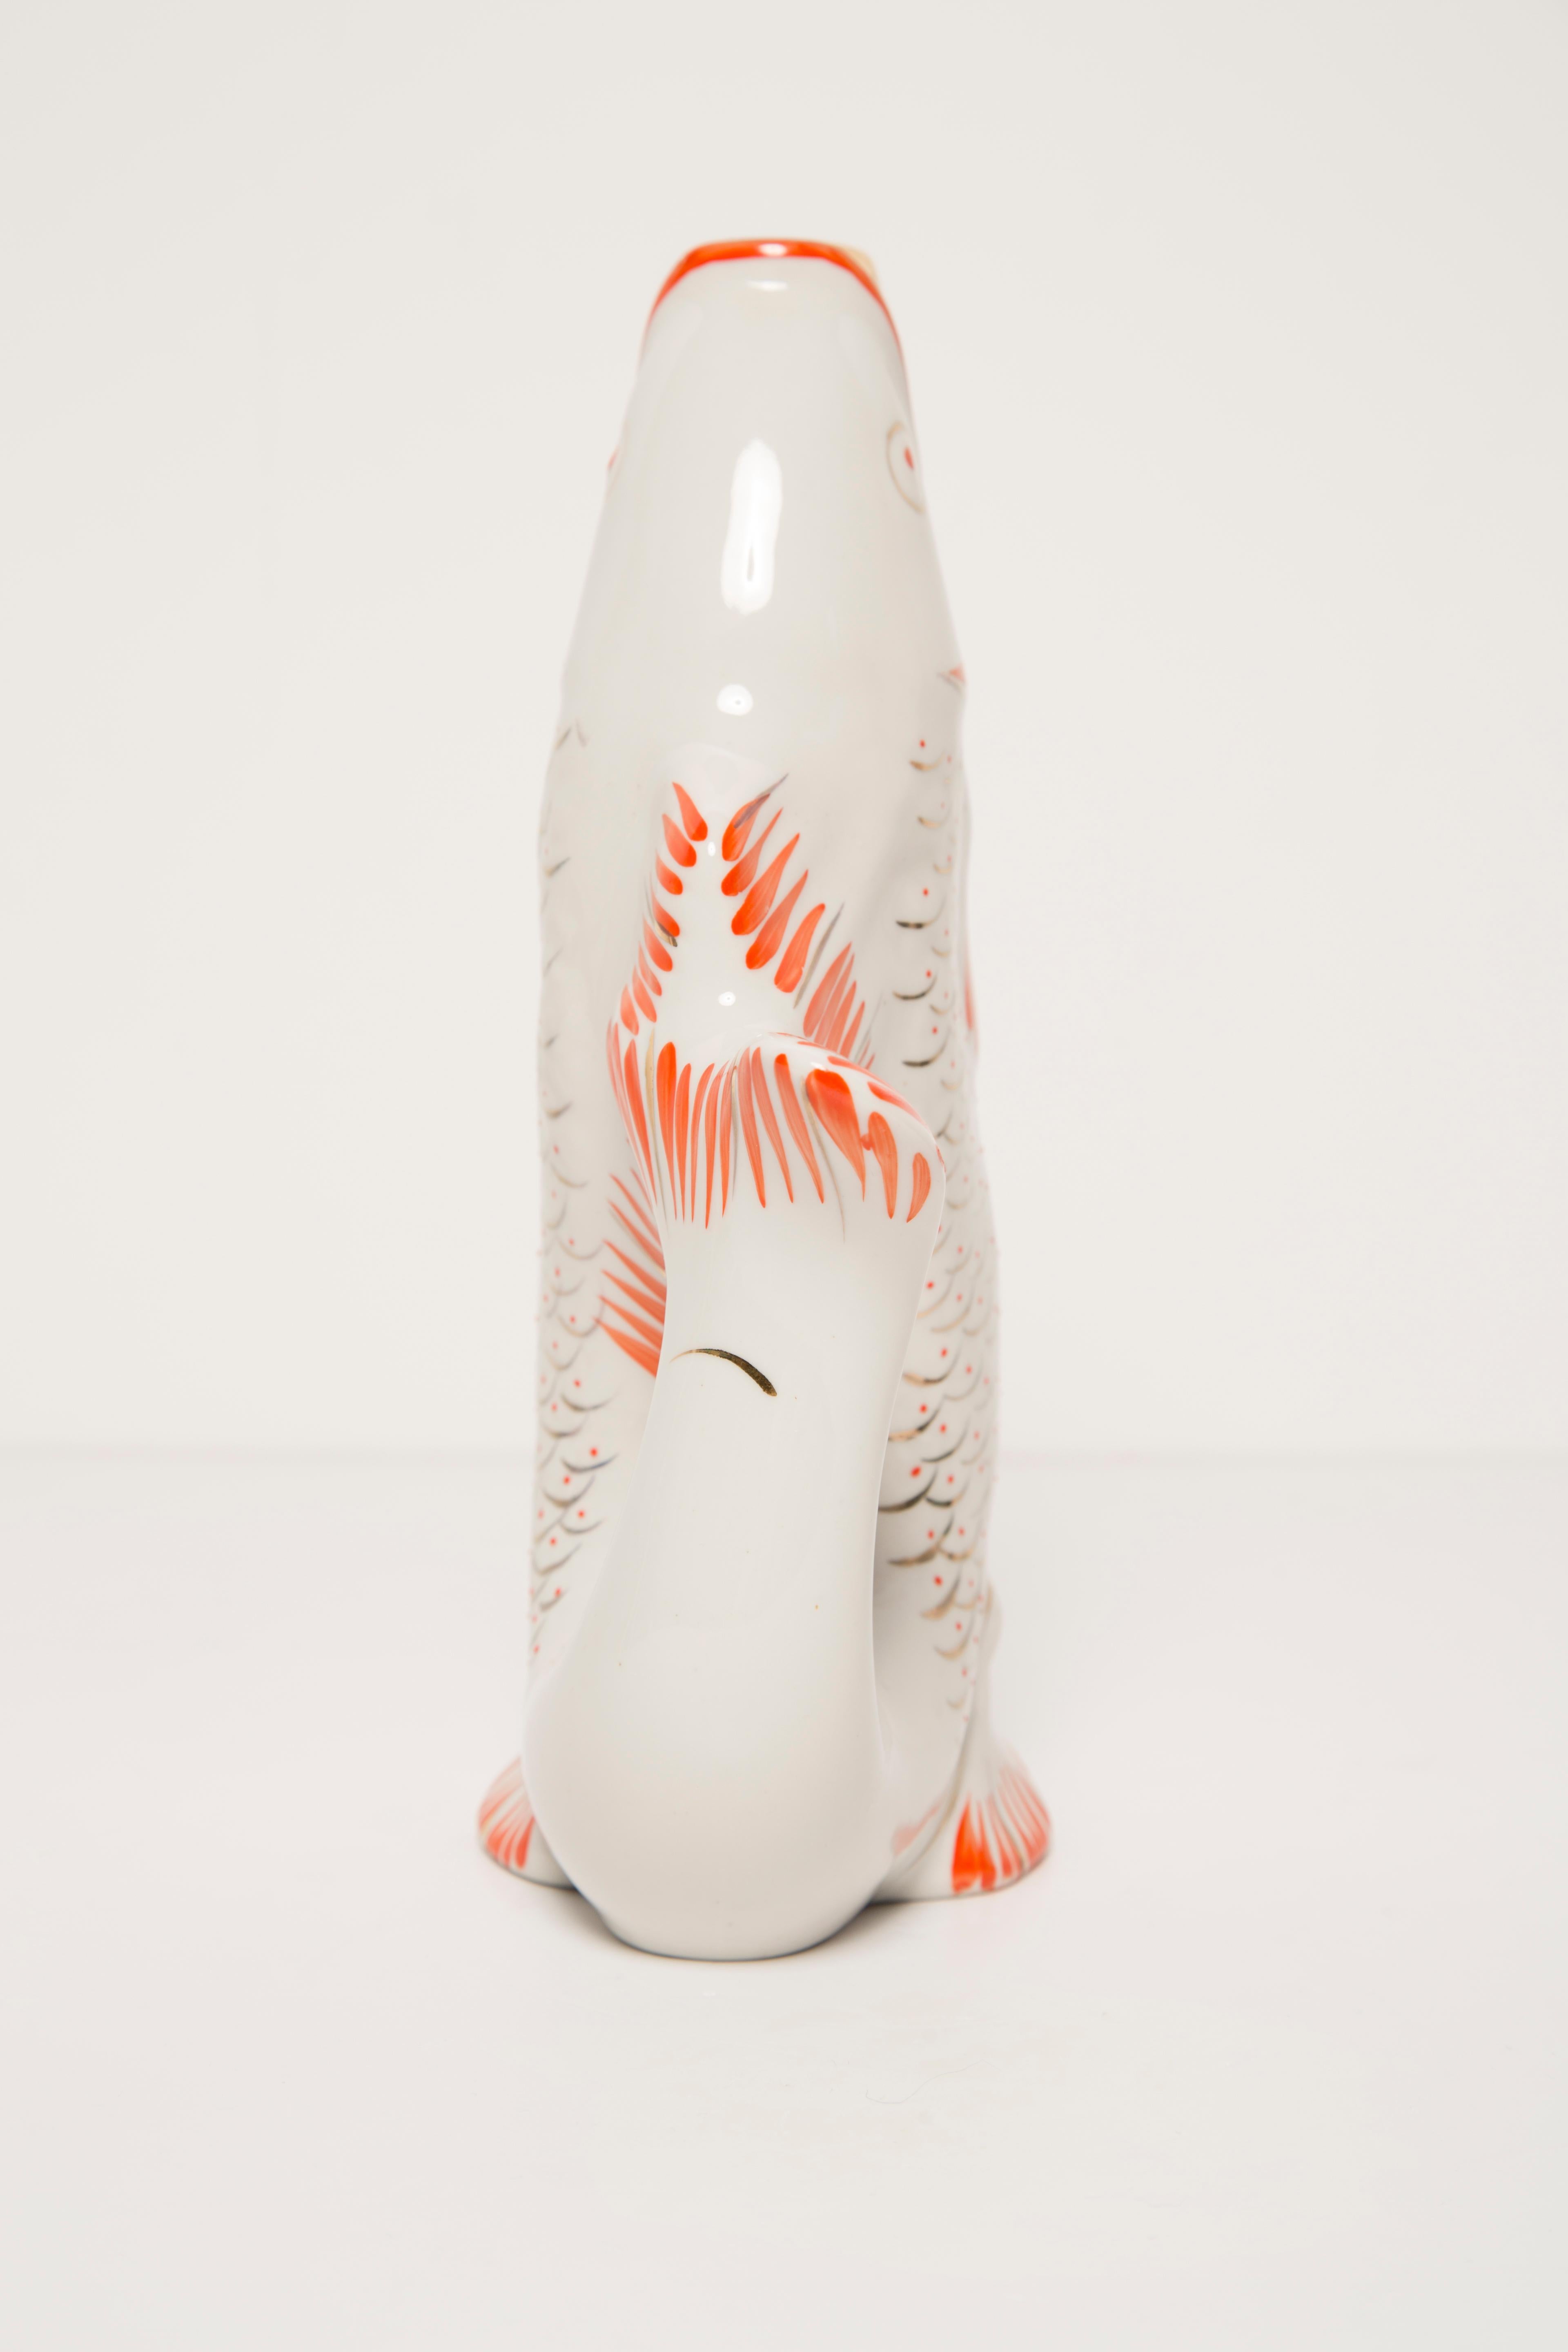 White Fish Glass Decanter or Vase, 20th Century, Europe, 1960s For Sale 1